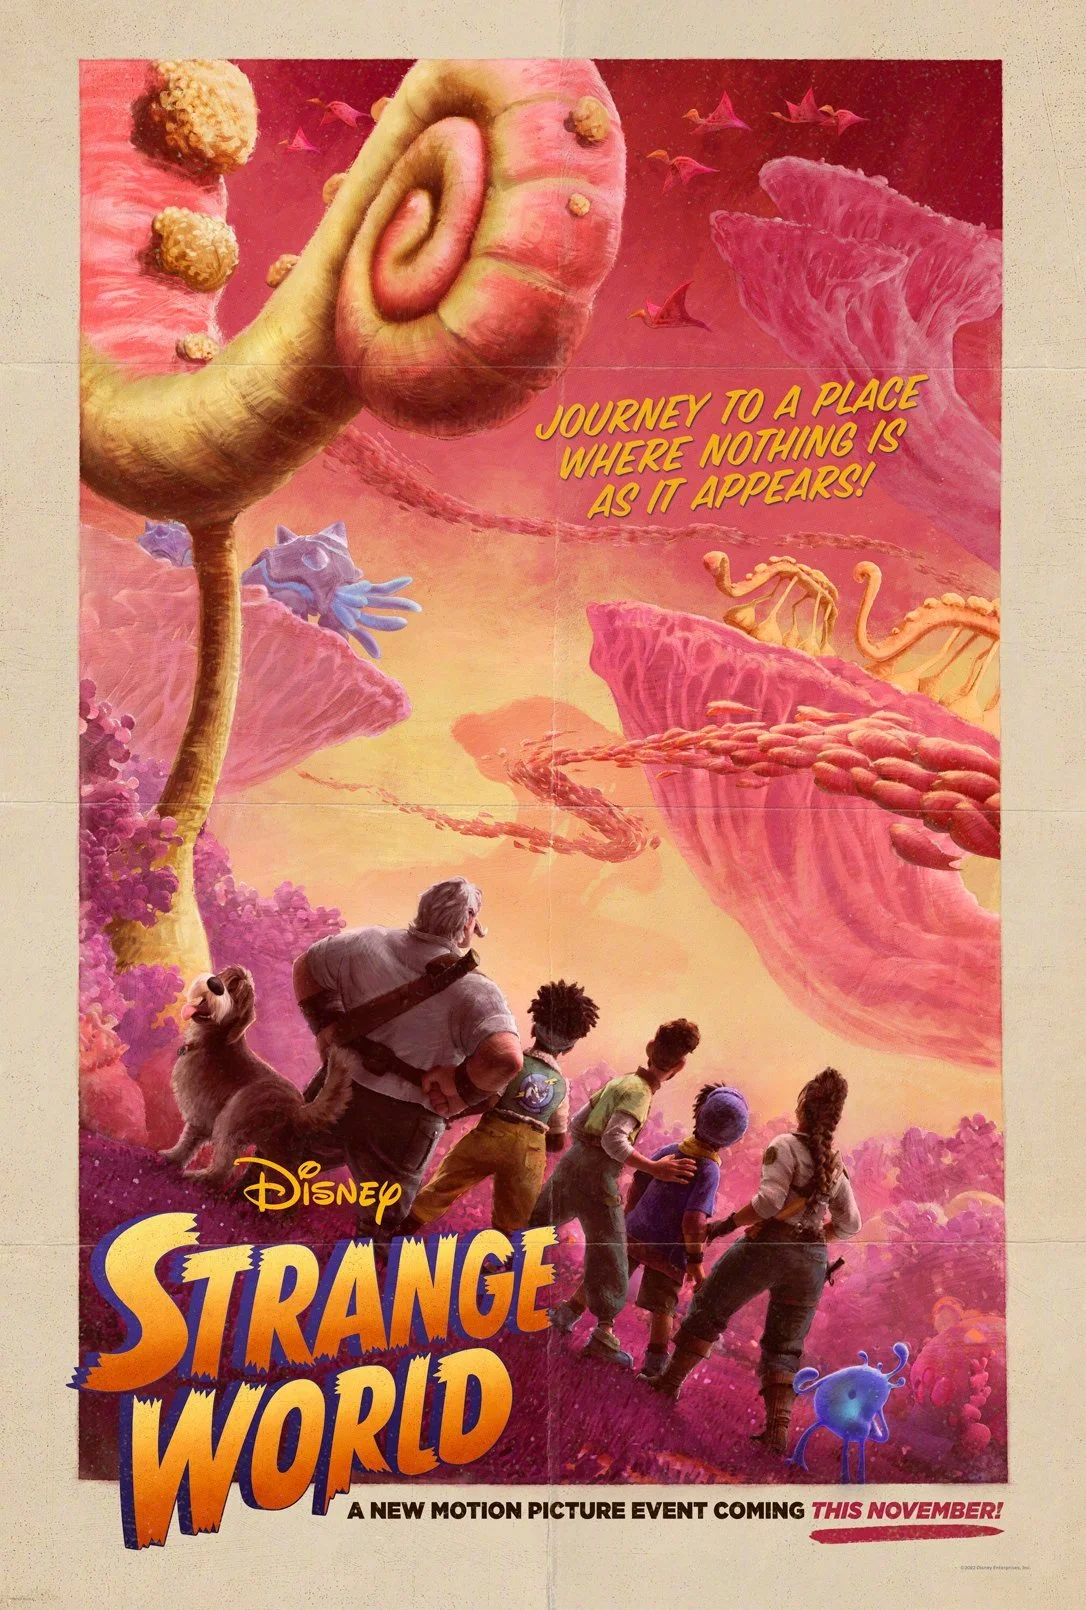 Disney's new animated film "Strange World" reveals its first teaser trailer and poster, it will be released in Northern America on November 23